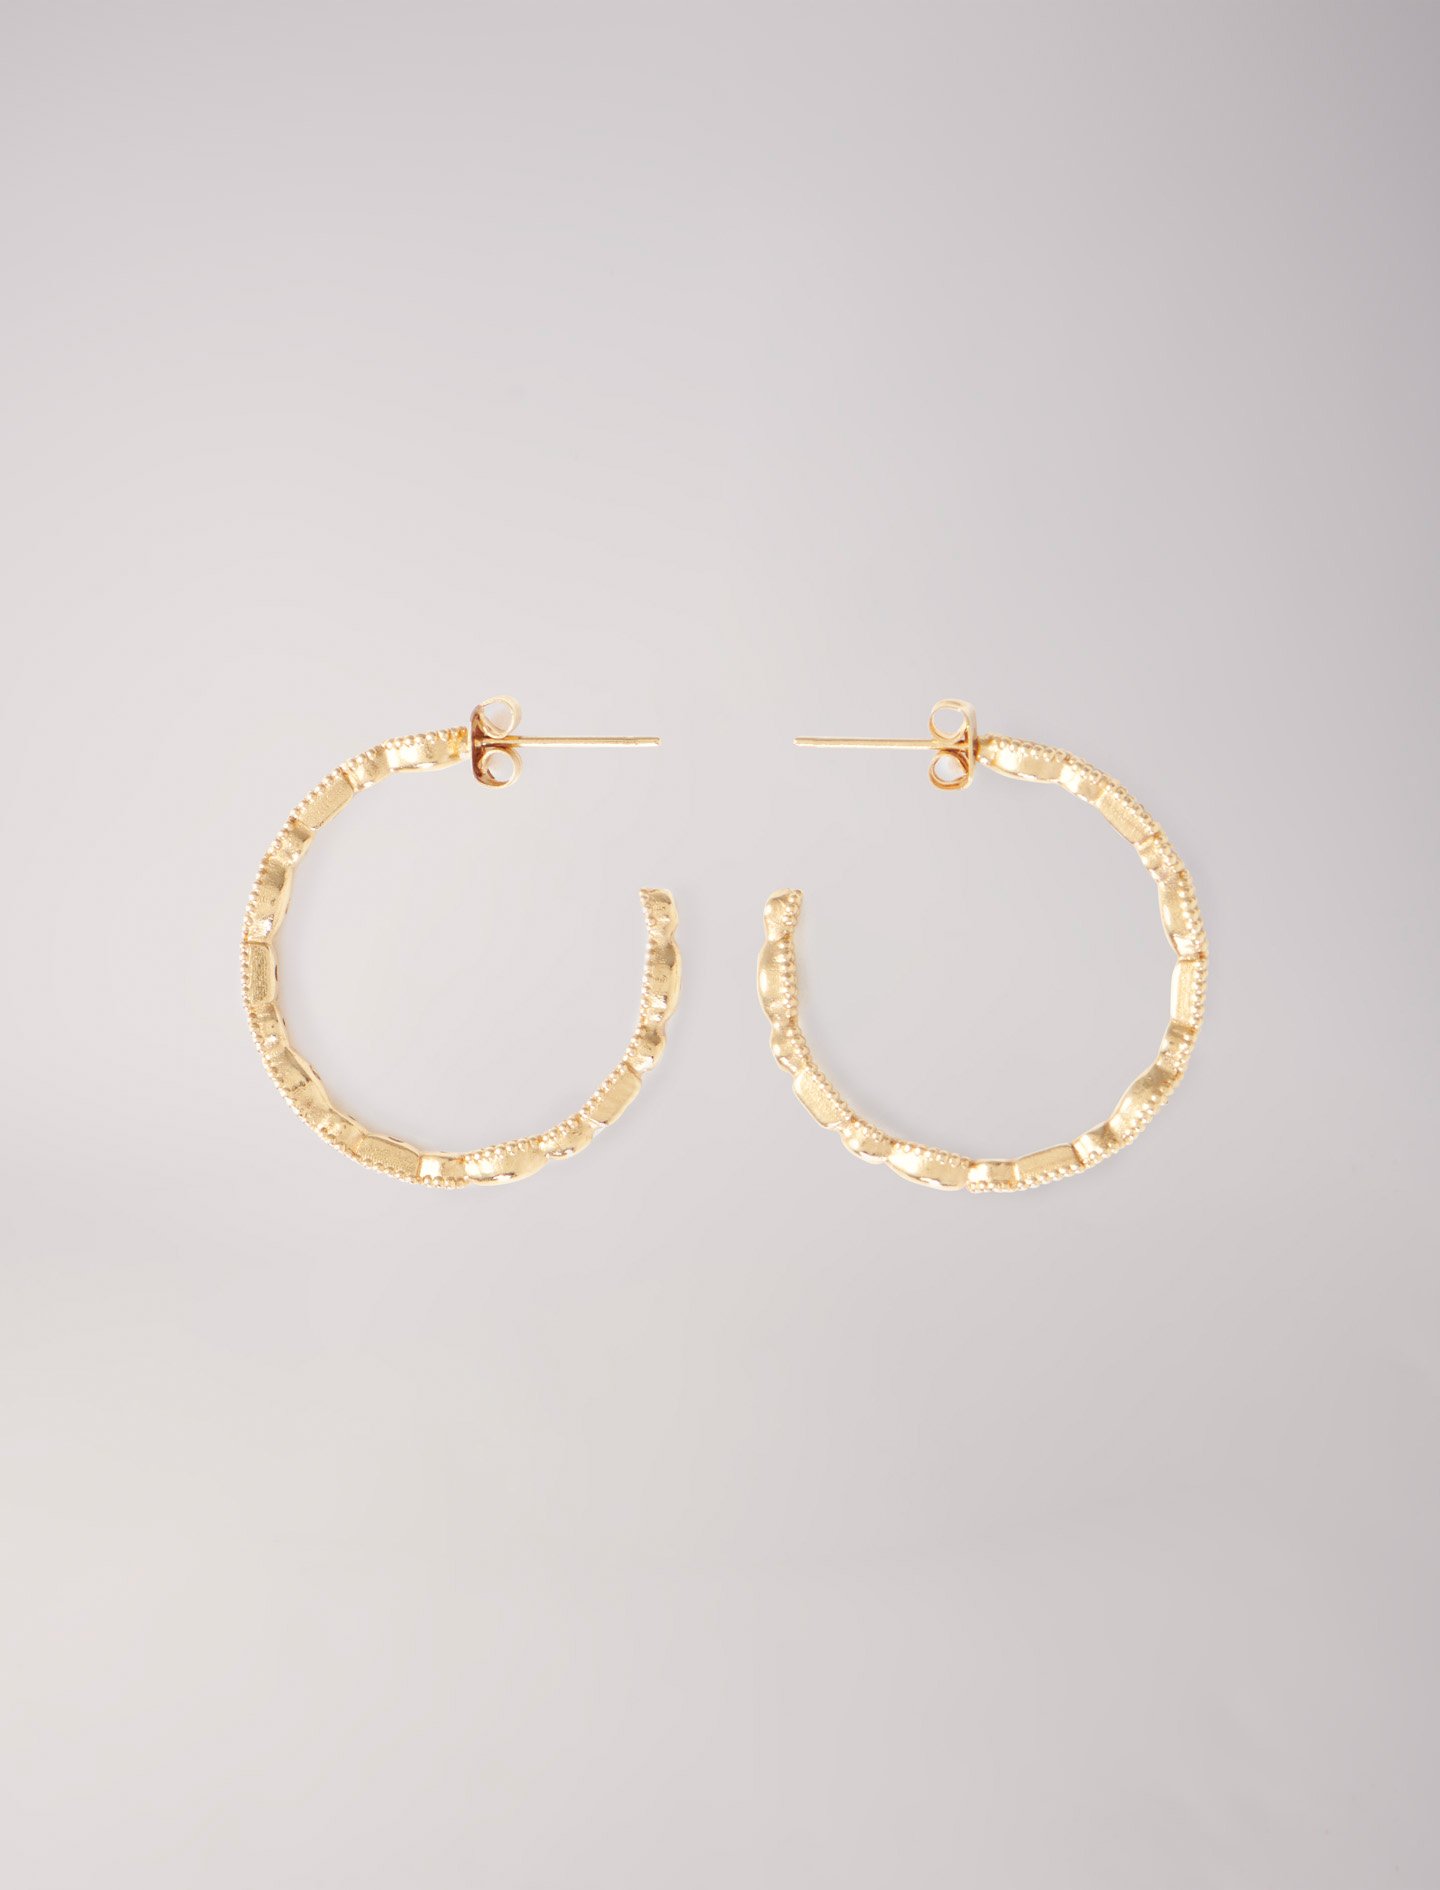 Mixte's zirconium oxide Jewellery: Diamanté-embellished large hoop earrings, size Mixte-Jewelry-OS (ONE SIZE), in color Gold / Yellow